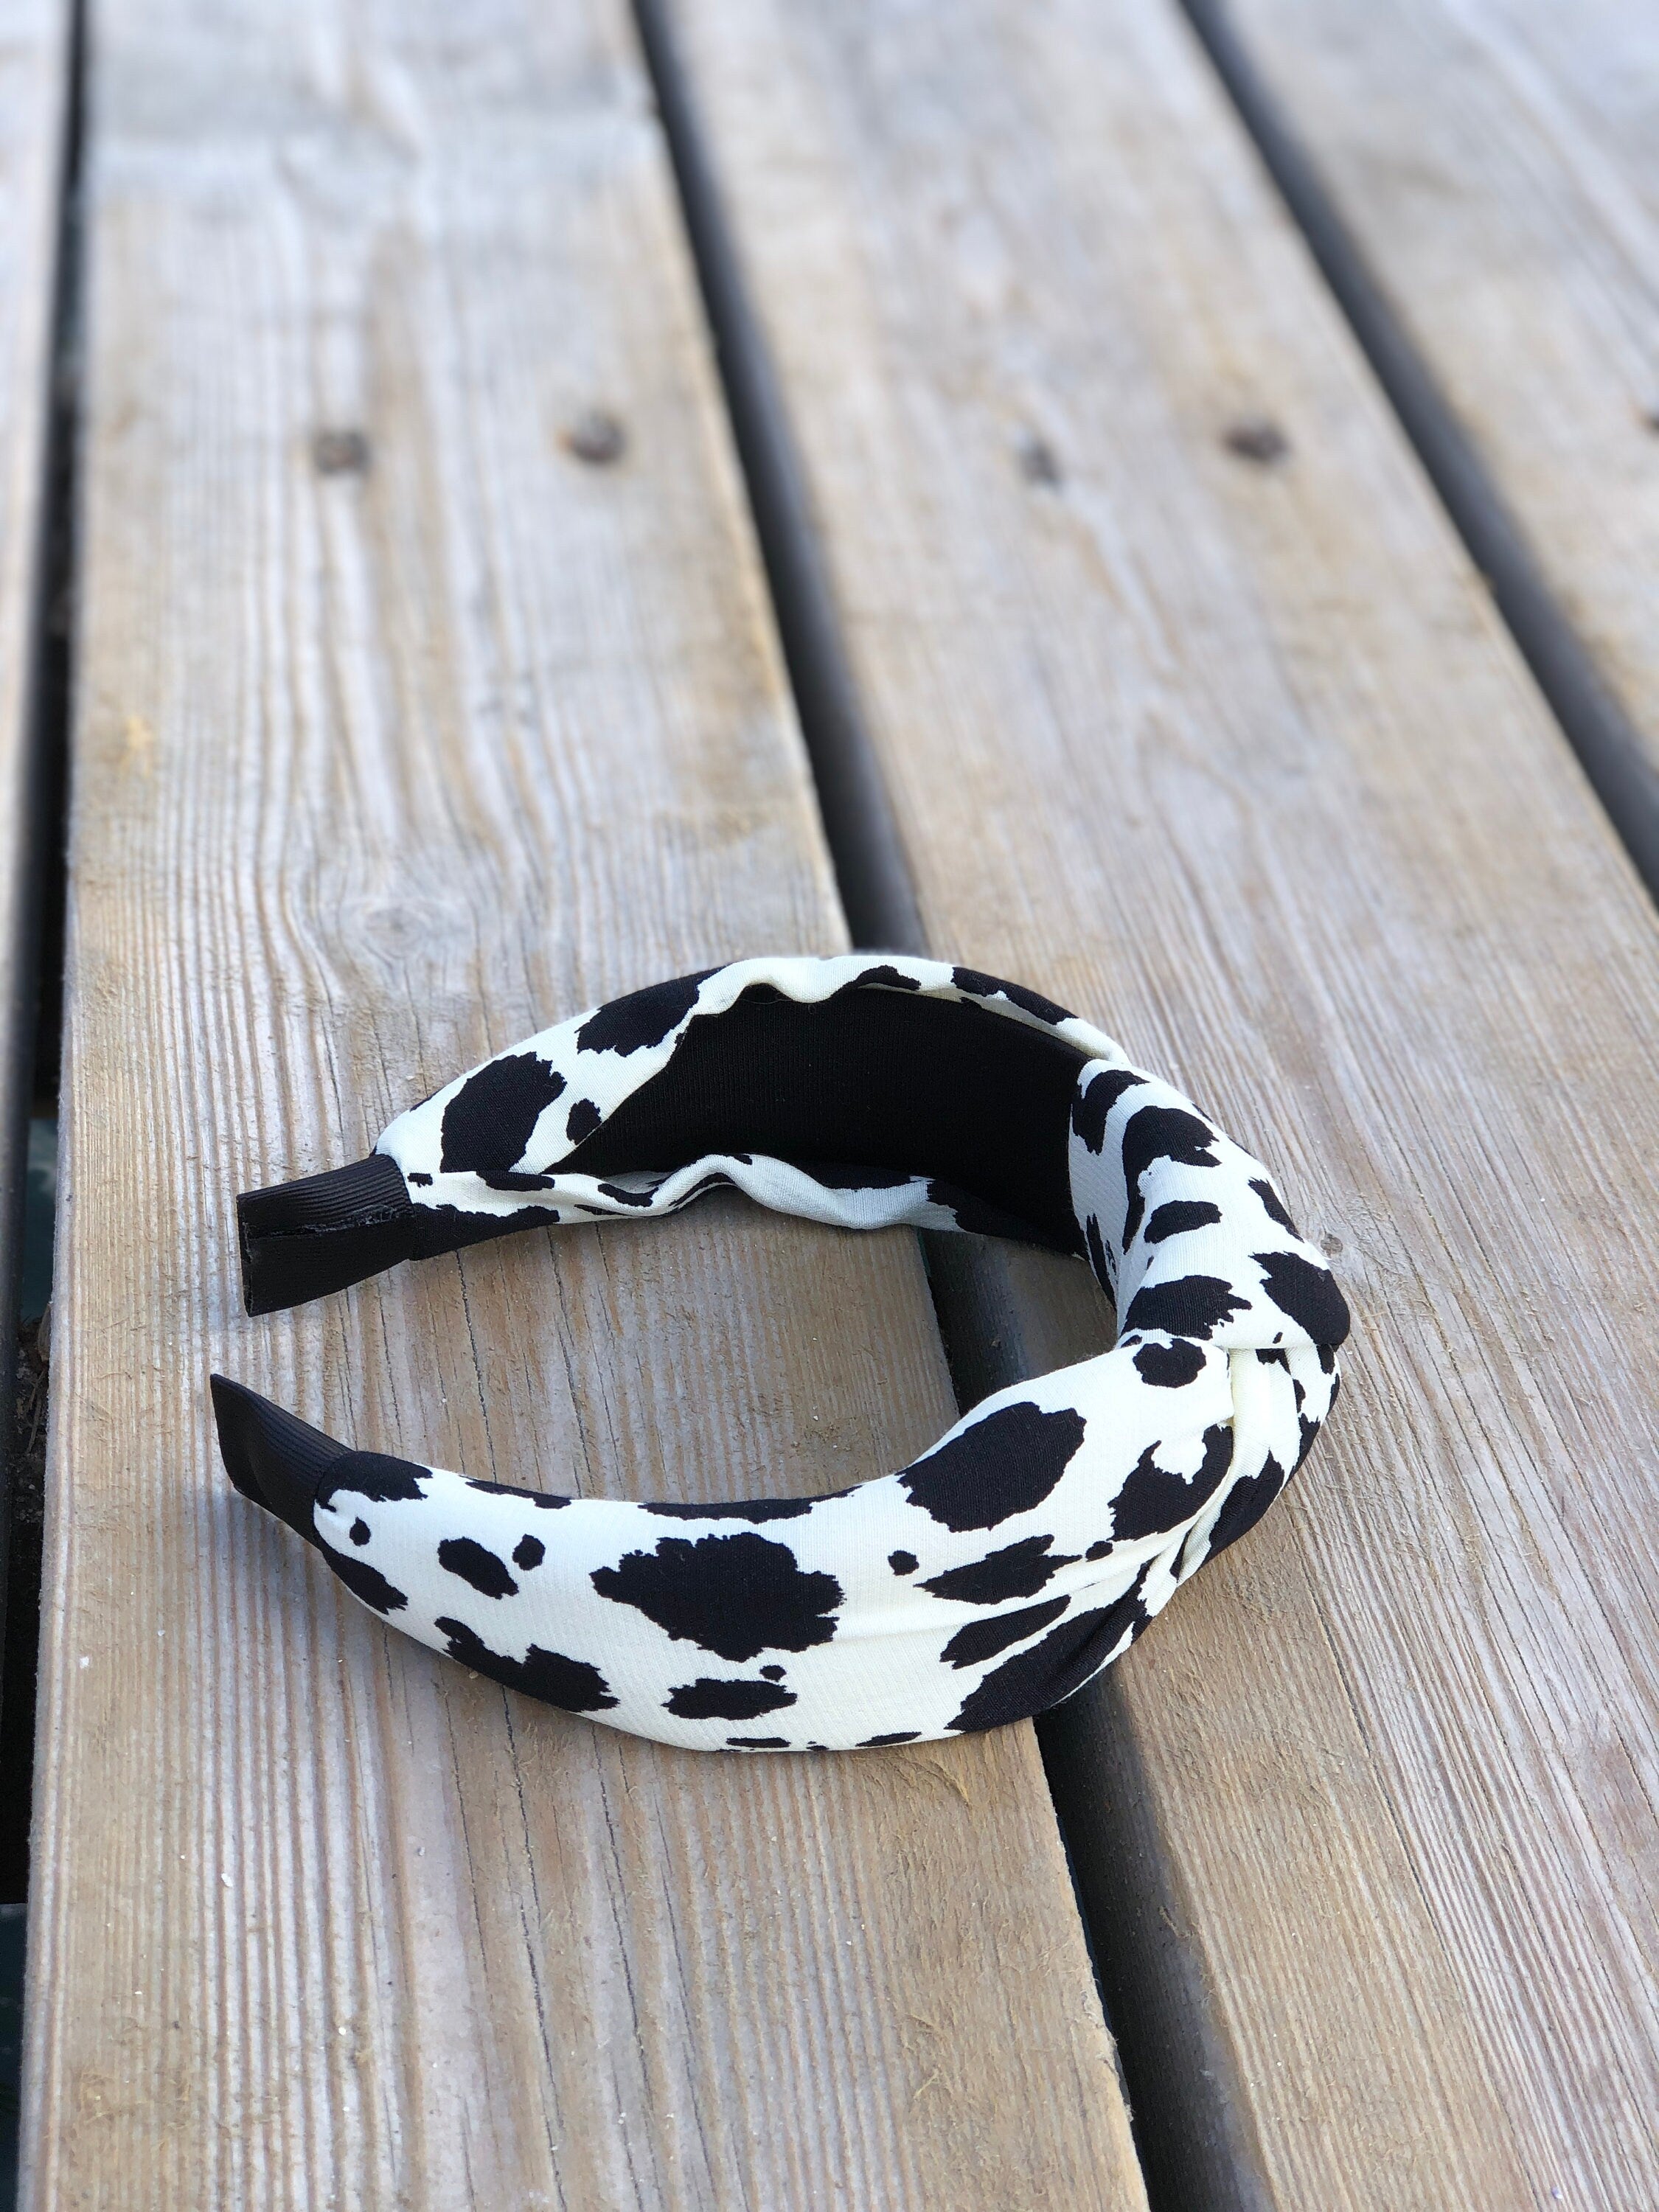 Stand out from the crowd with this bold and trendy white leopard headband, crafted from African cotton and finished with a stylish bow.